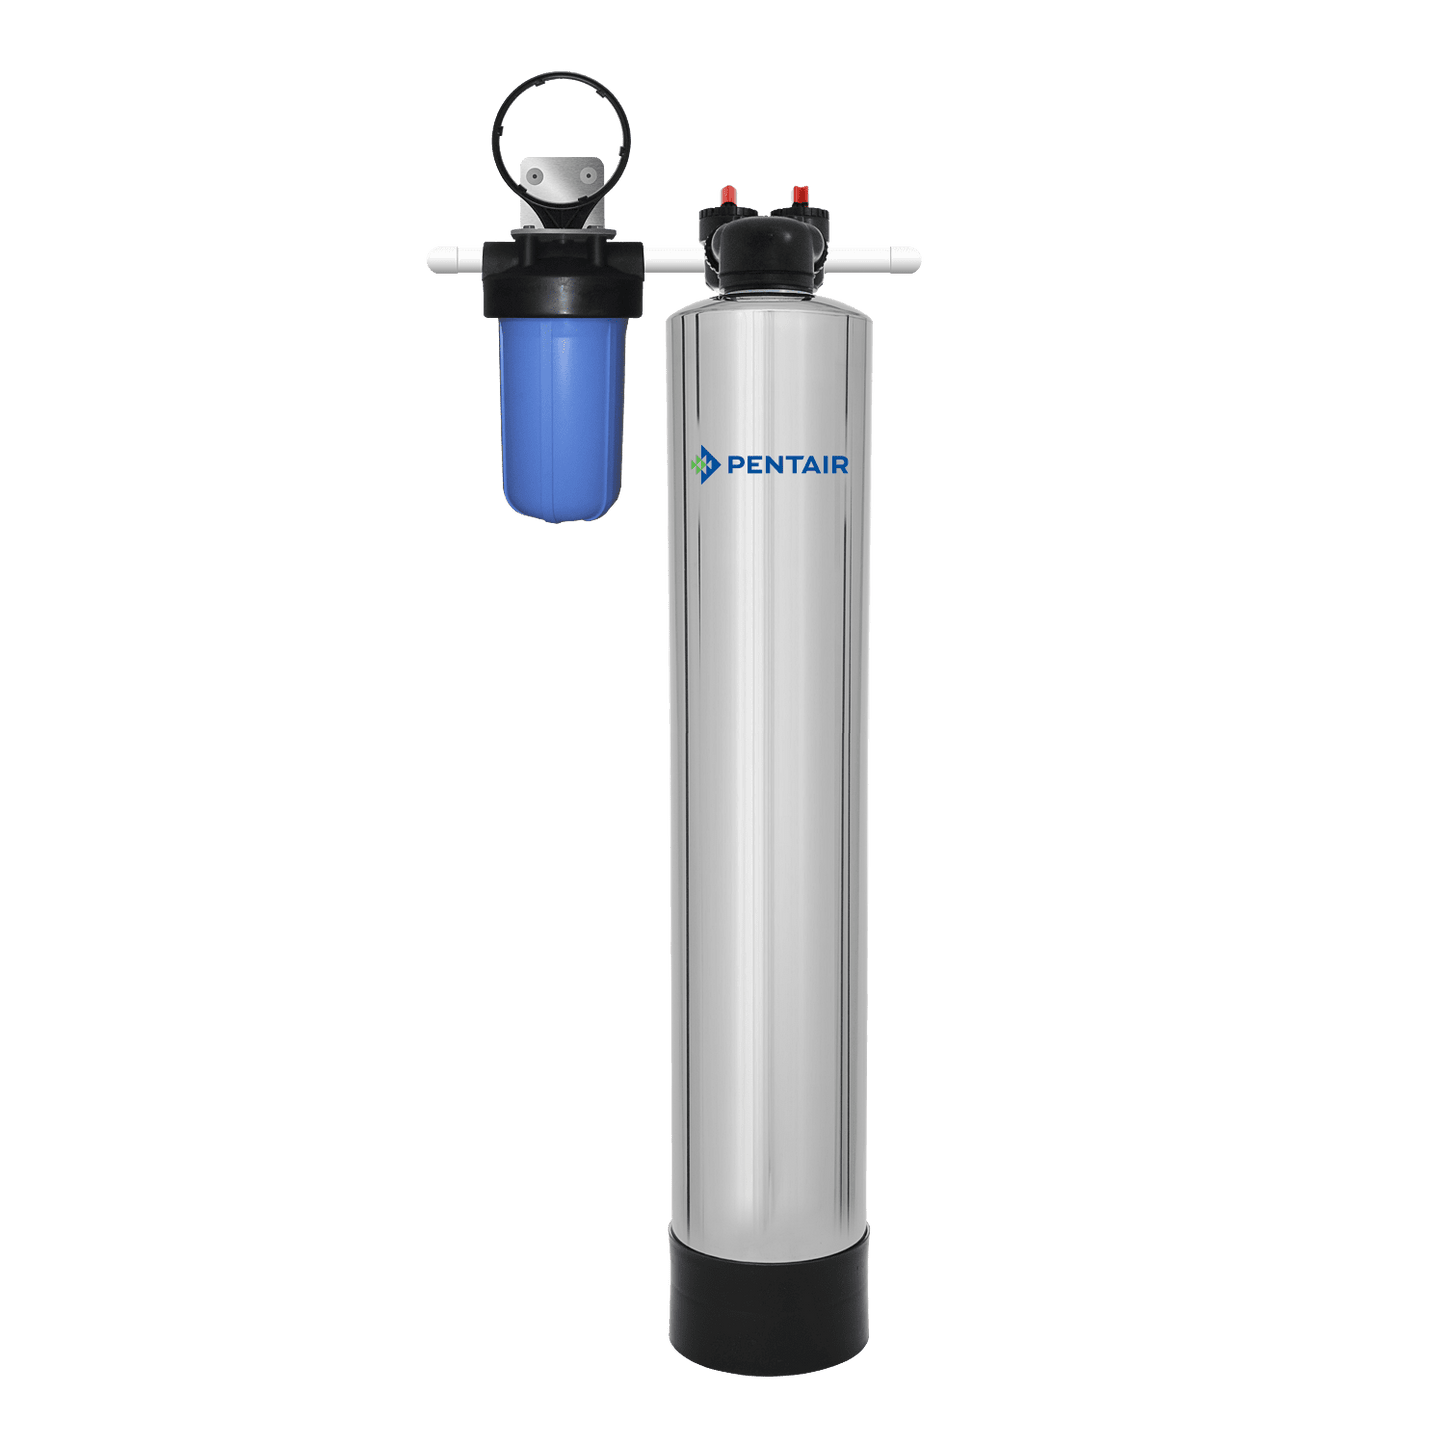 PC600-P Pelican Water Filter System | Whole House Water Filter System (1-3 Bathrooms)